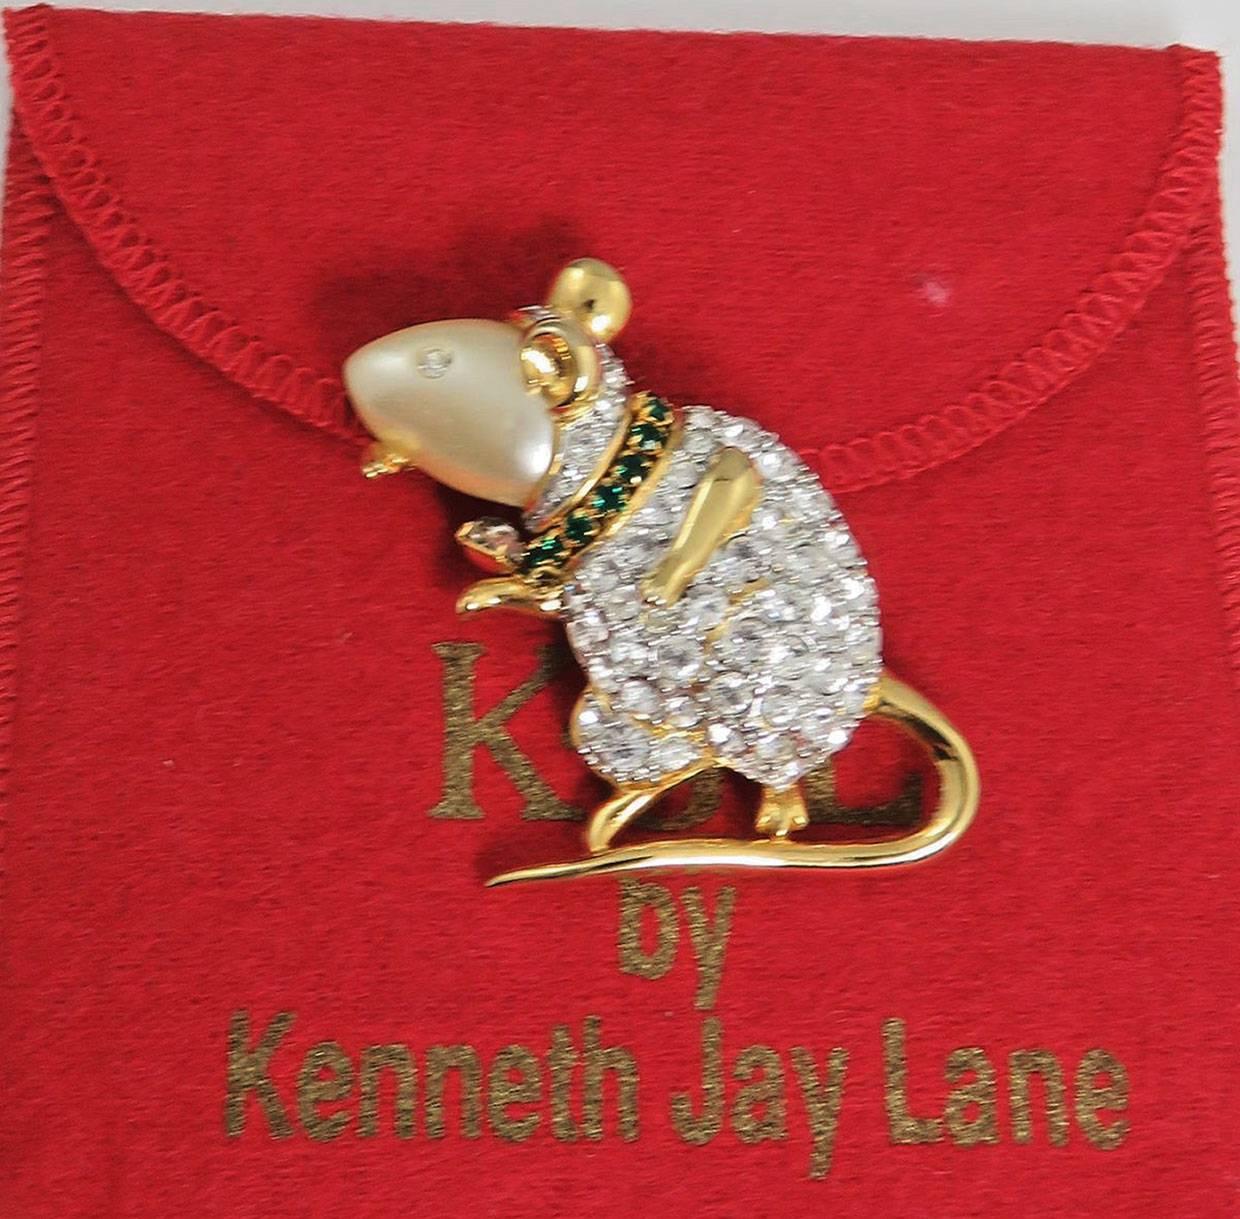 Wonderful KJL Mouse Brooch; Faux South Sea Pearl body, enhanced with sparkling green and white Swarovski crystals; original red pouch included.  
